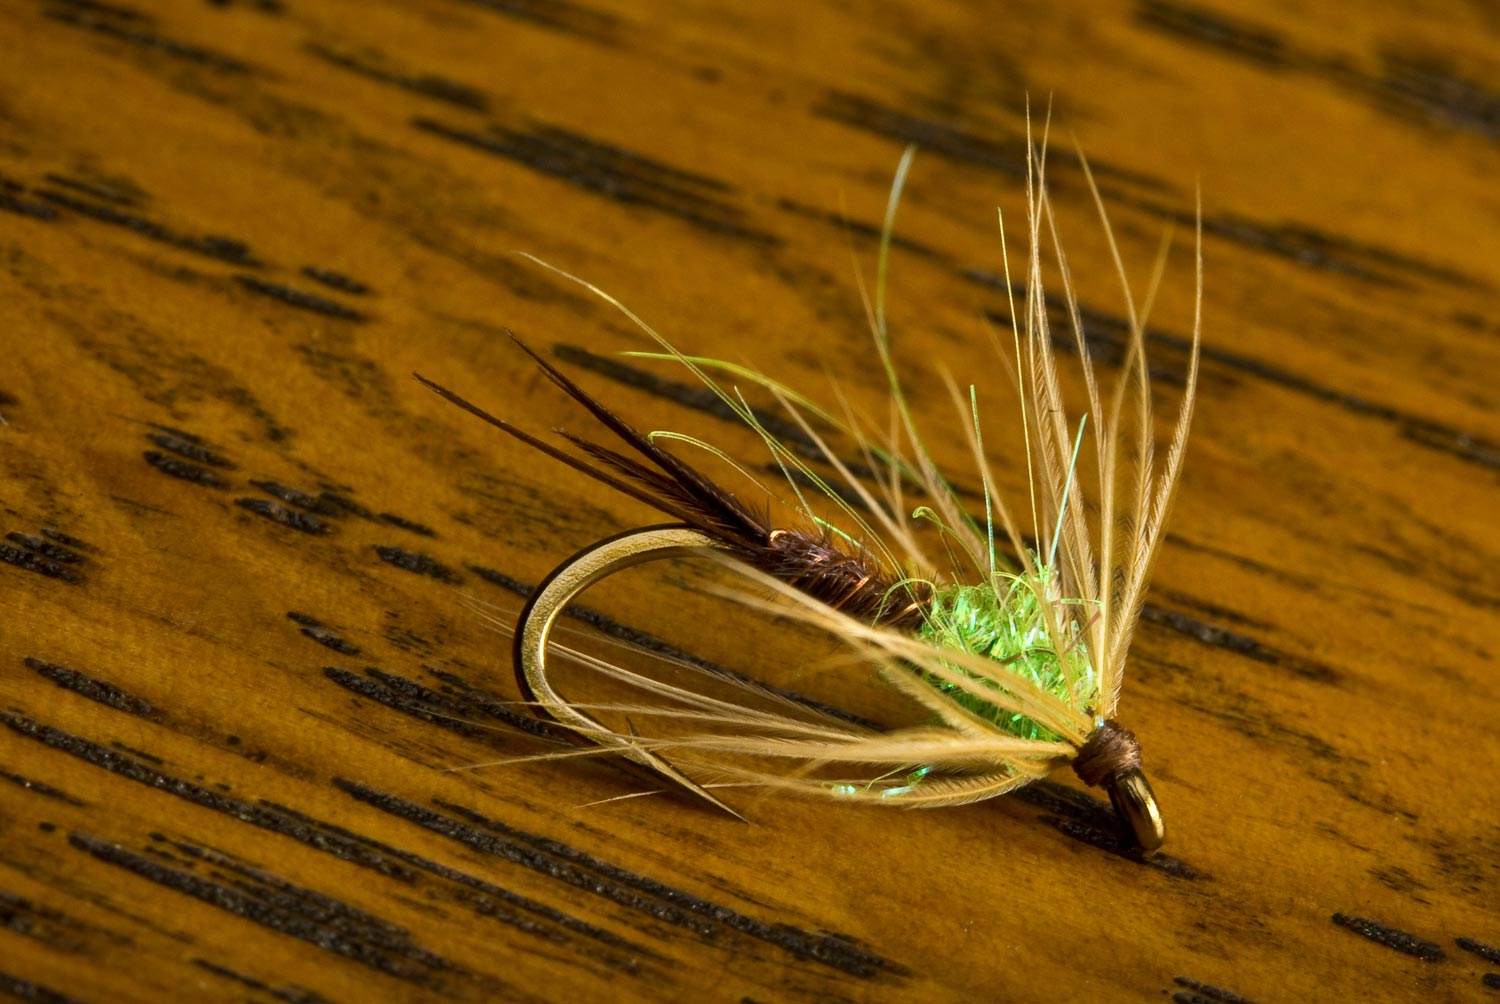 Fly Fishing Soft Hackles: Nymphs, Emergers, and Dry Flies - Books